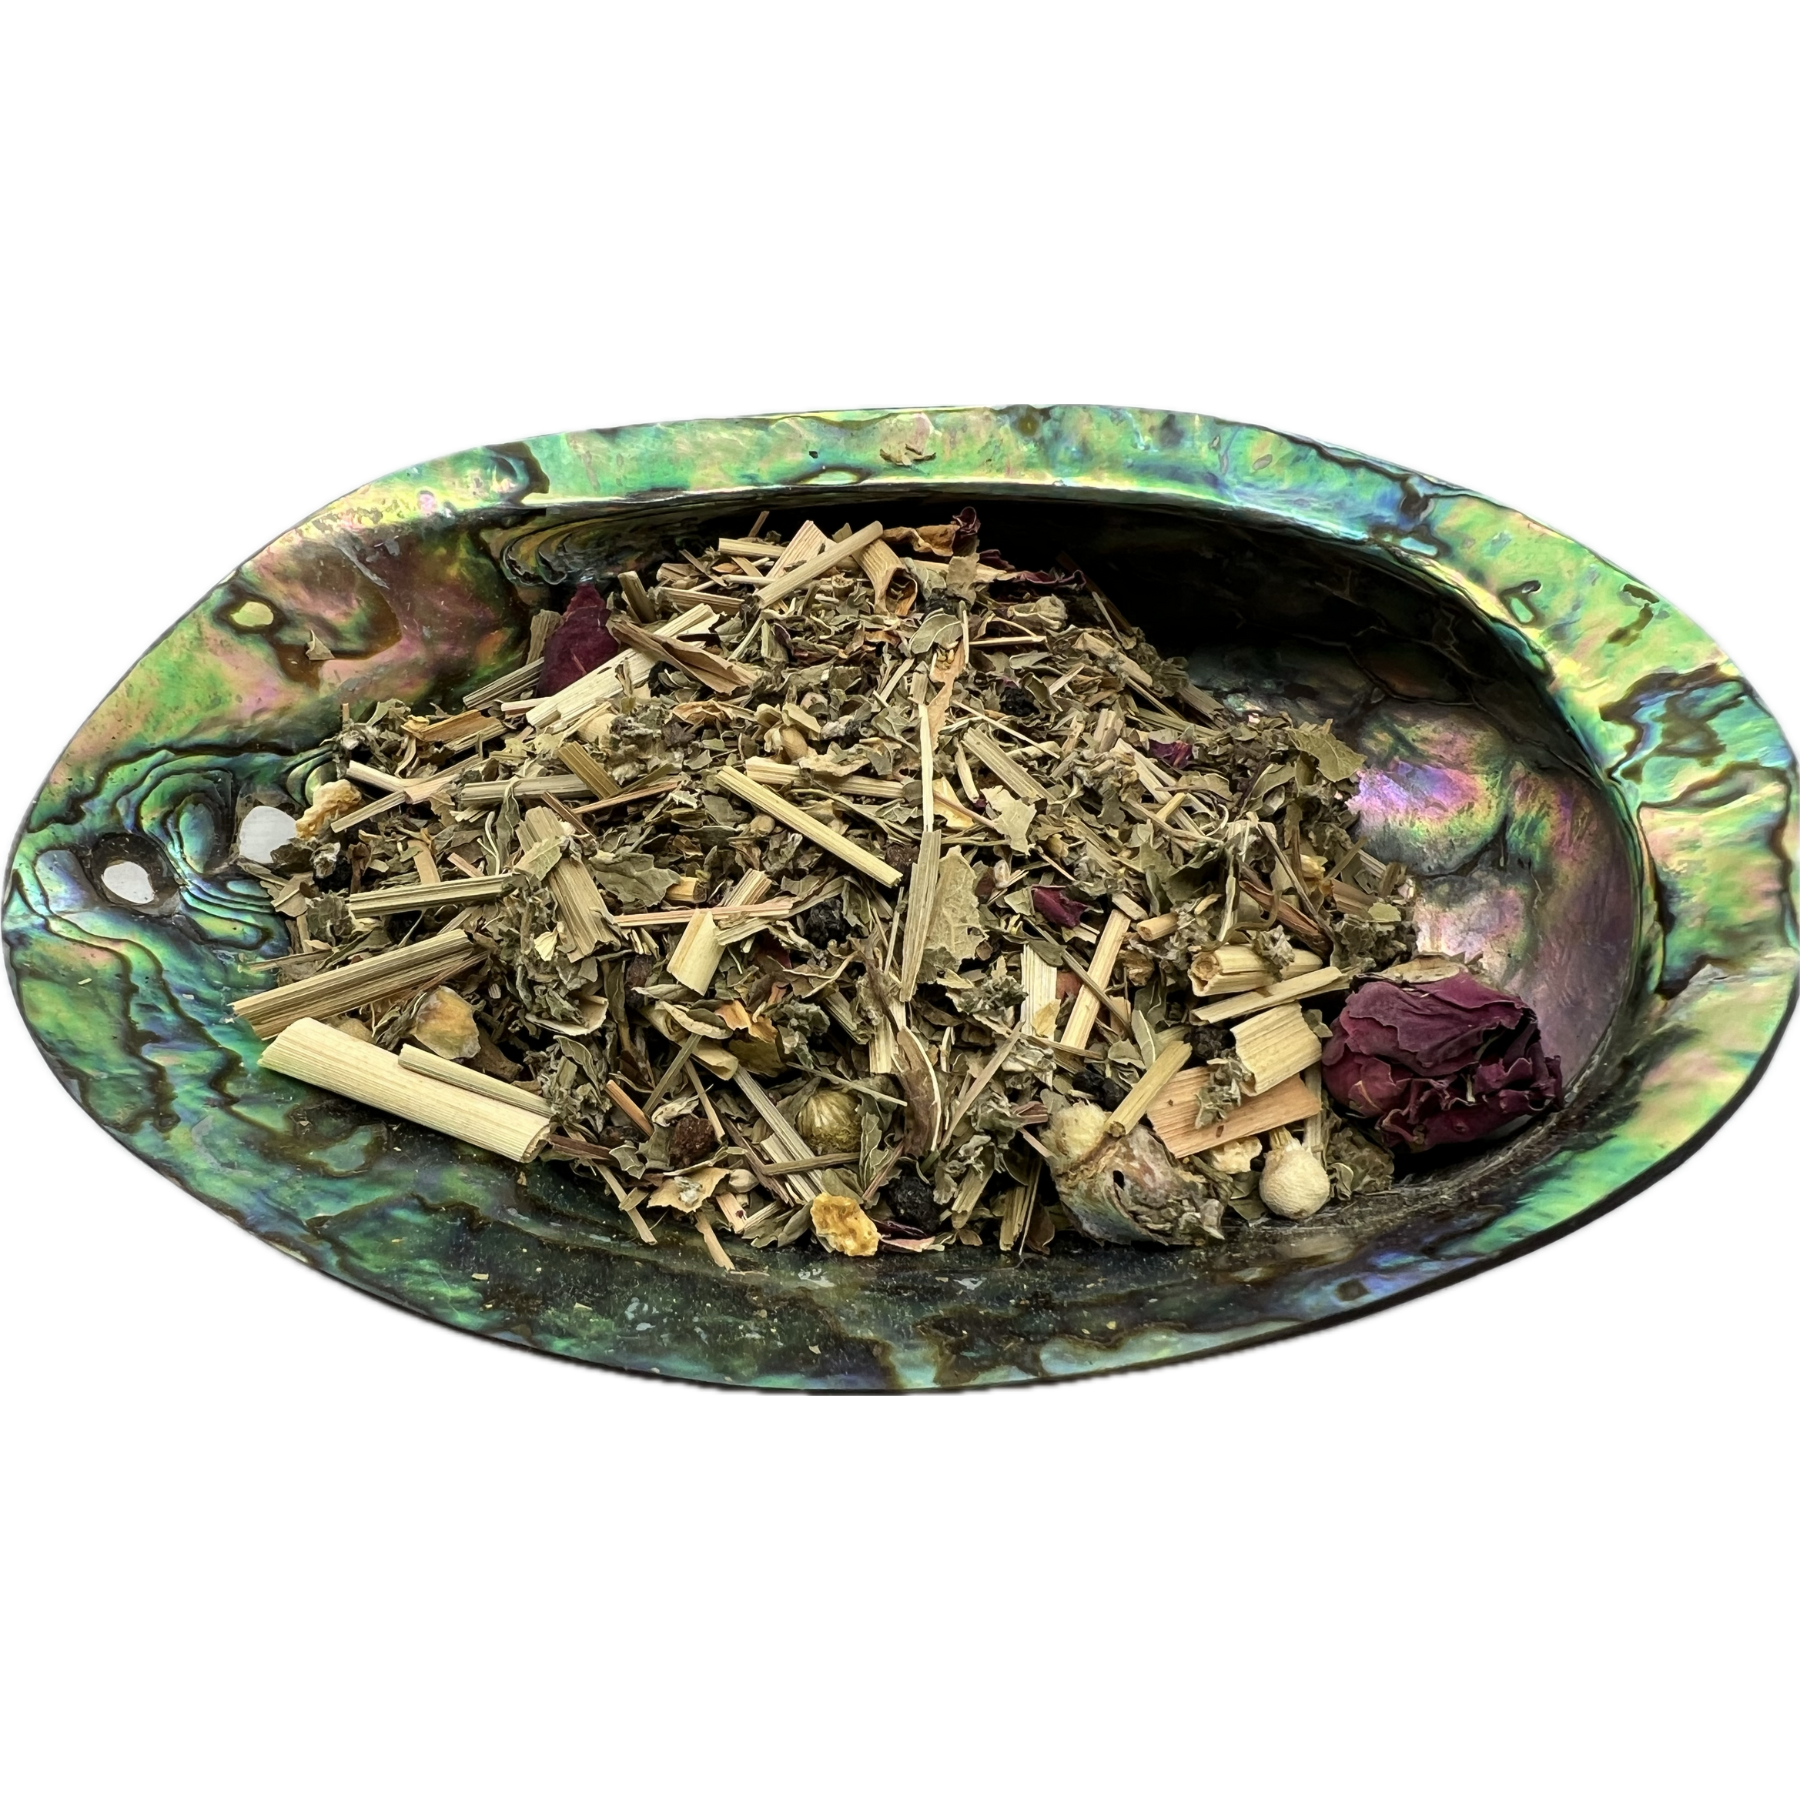 Dried mixed herbs called Lazy Daze Organic Tea placed on a colorful shell bowl